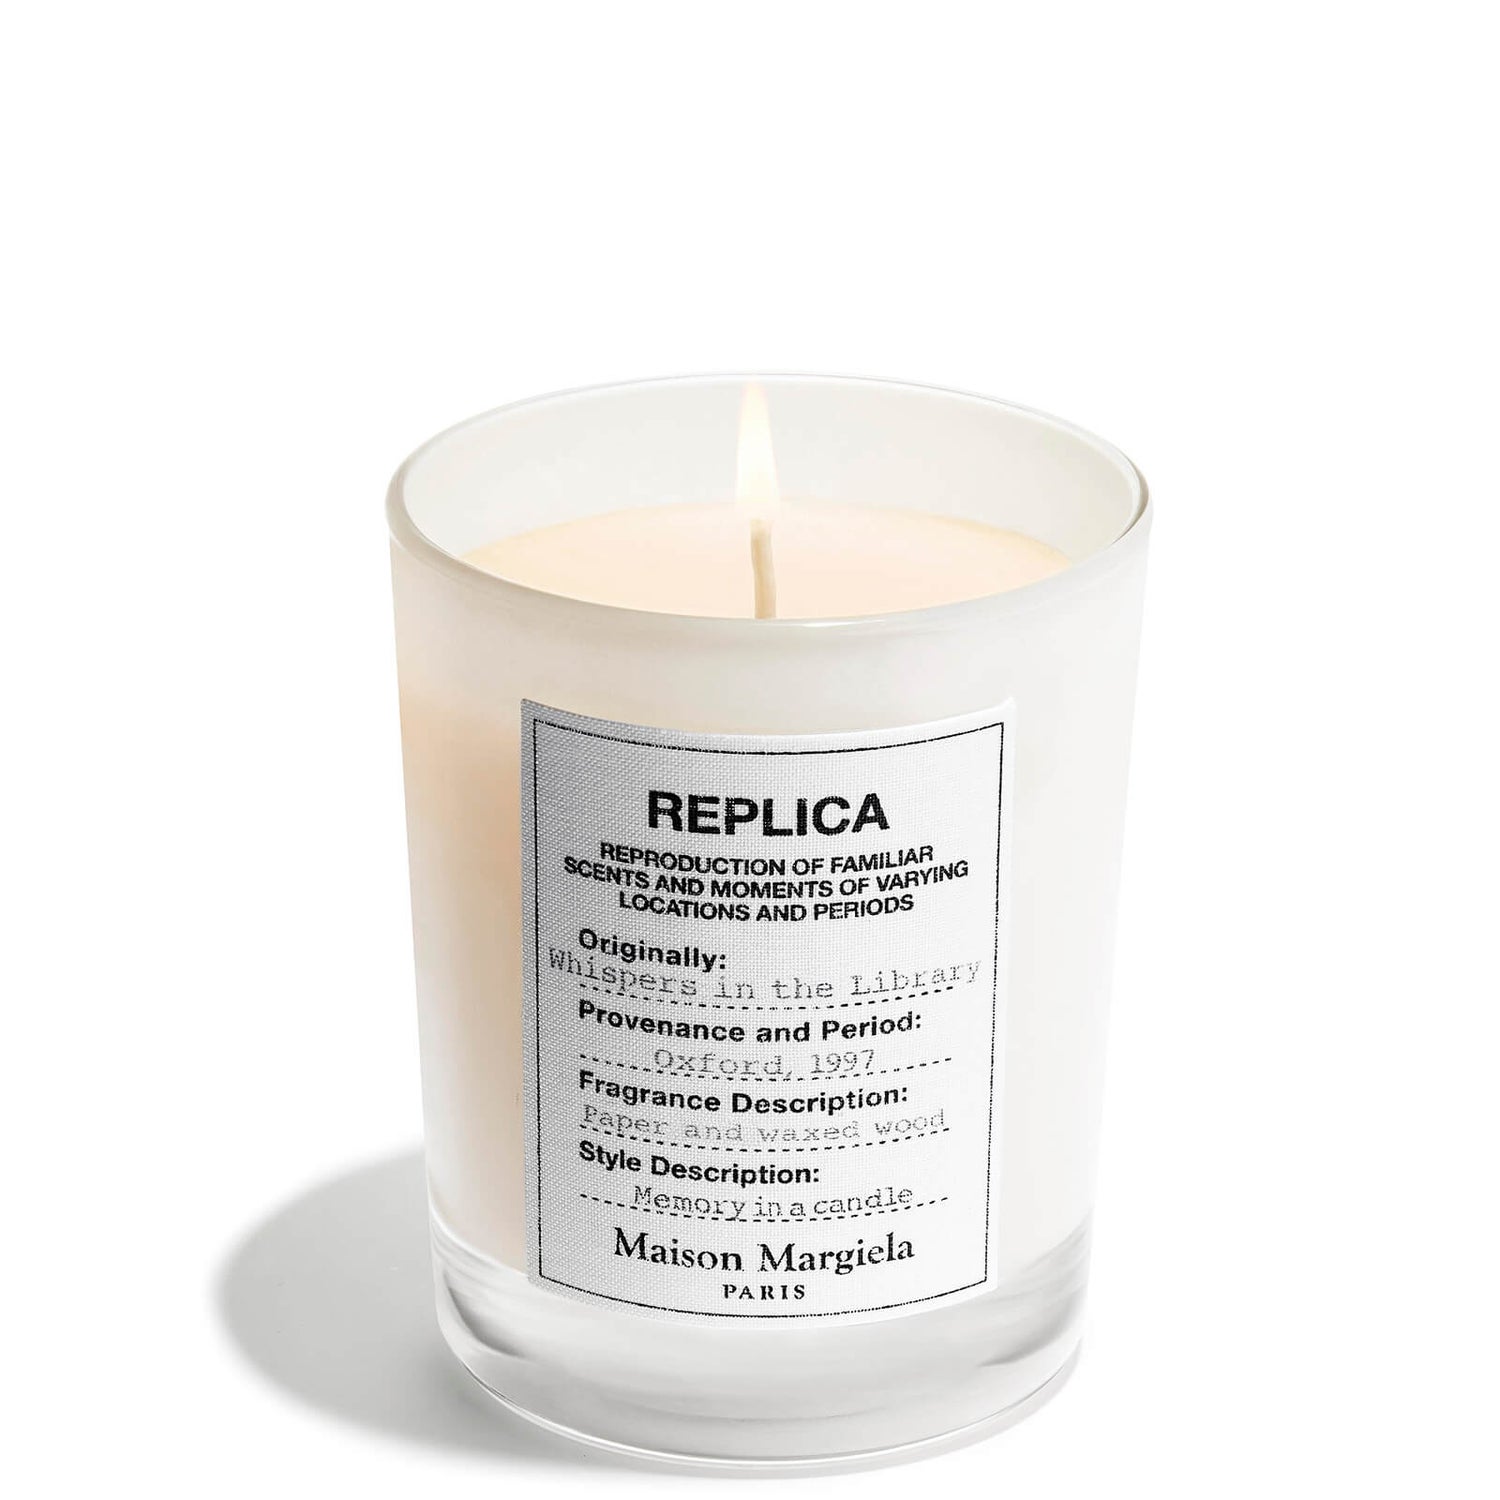 Maison Margiela Replica Whispers in The Library Candle 165g | LOOKFANTASTIC